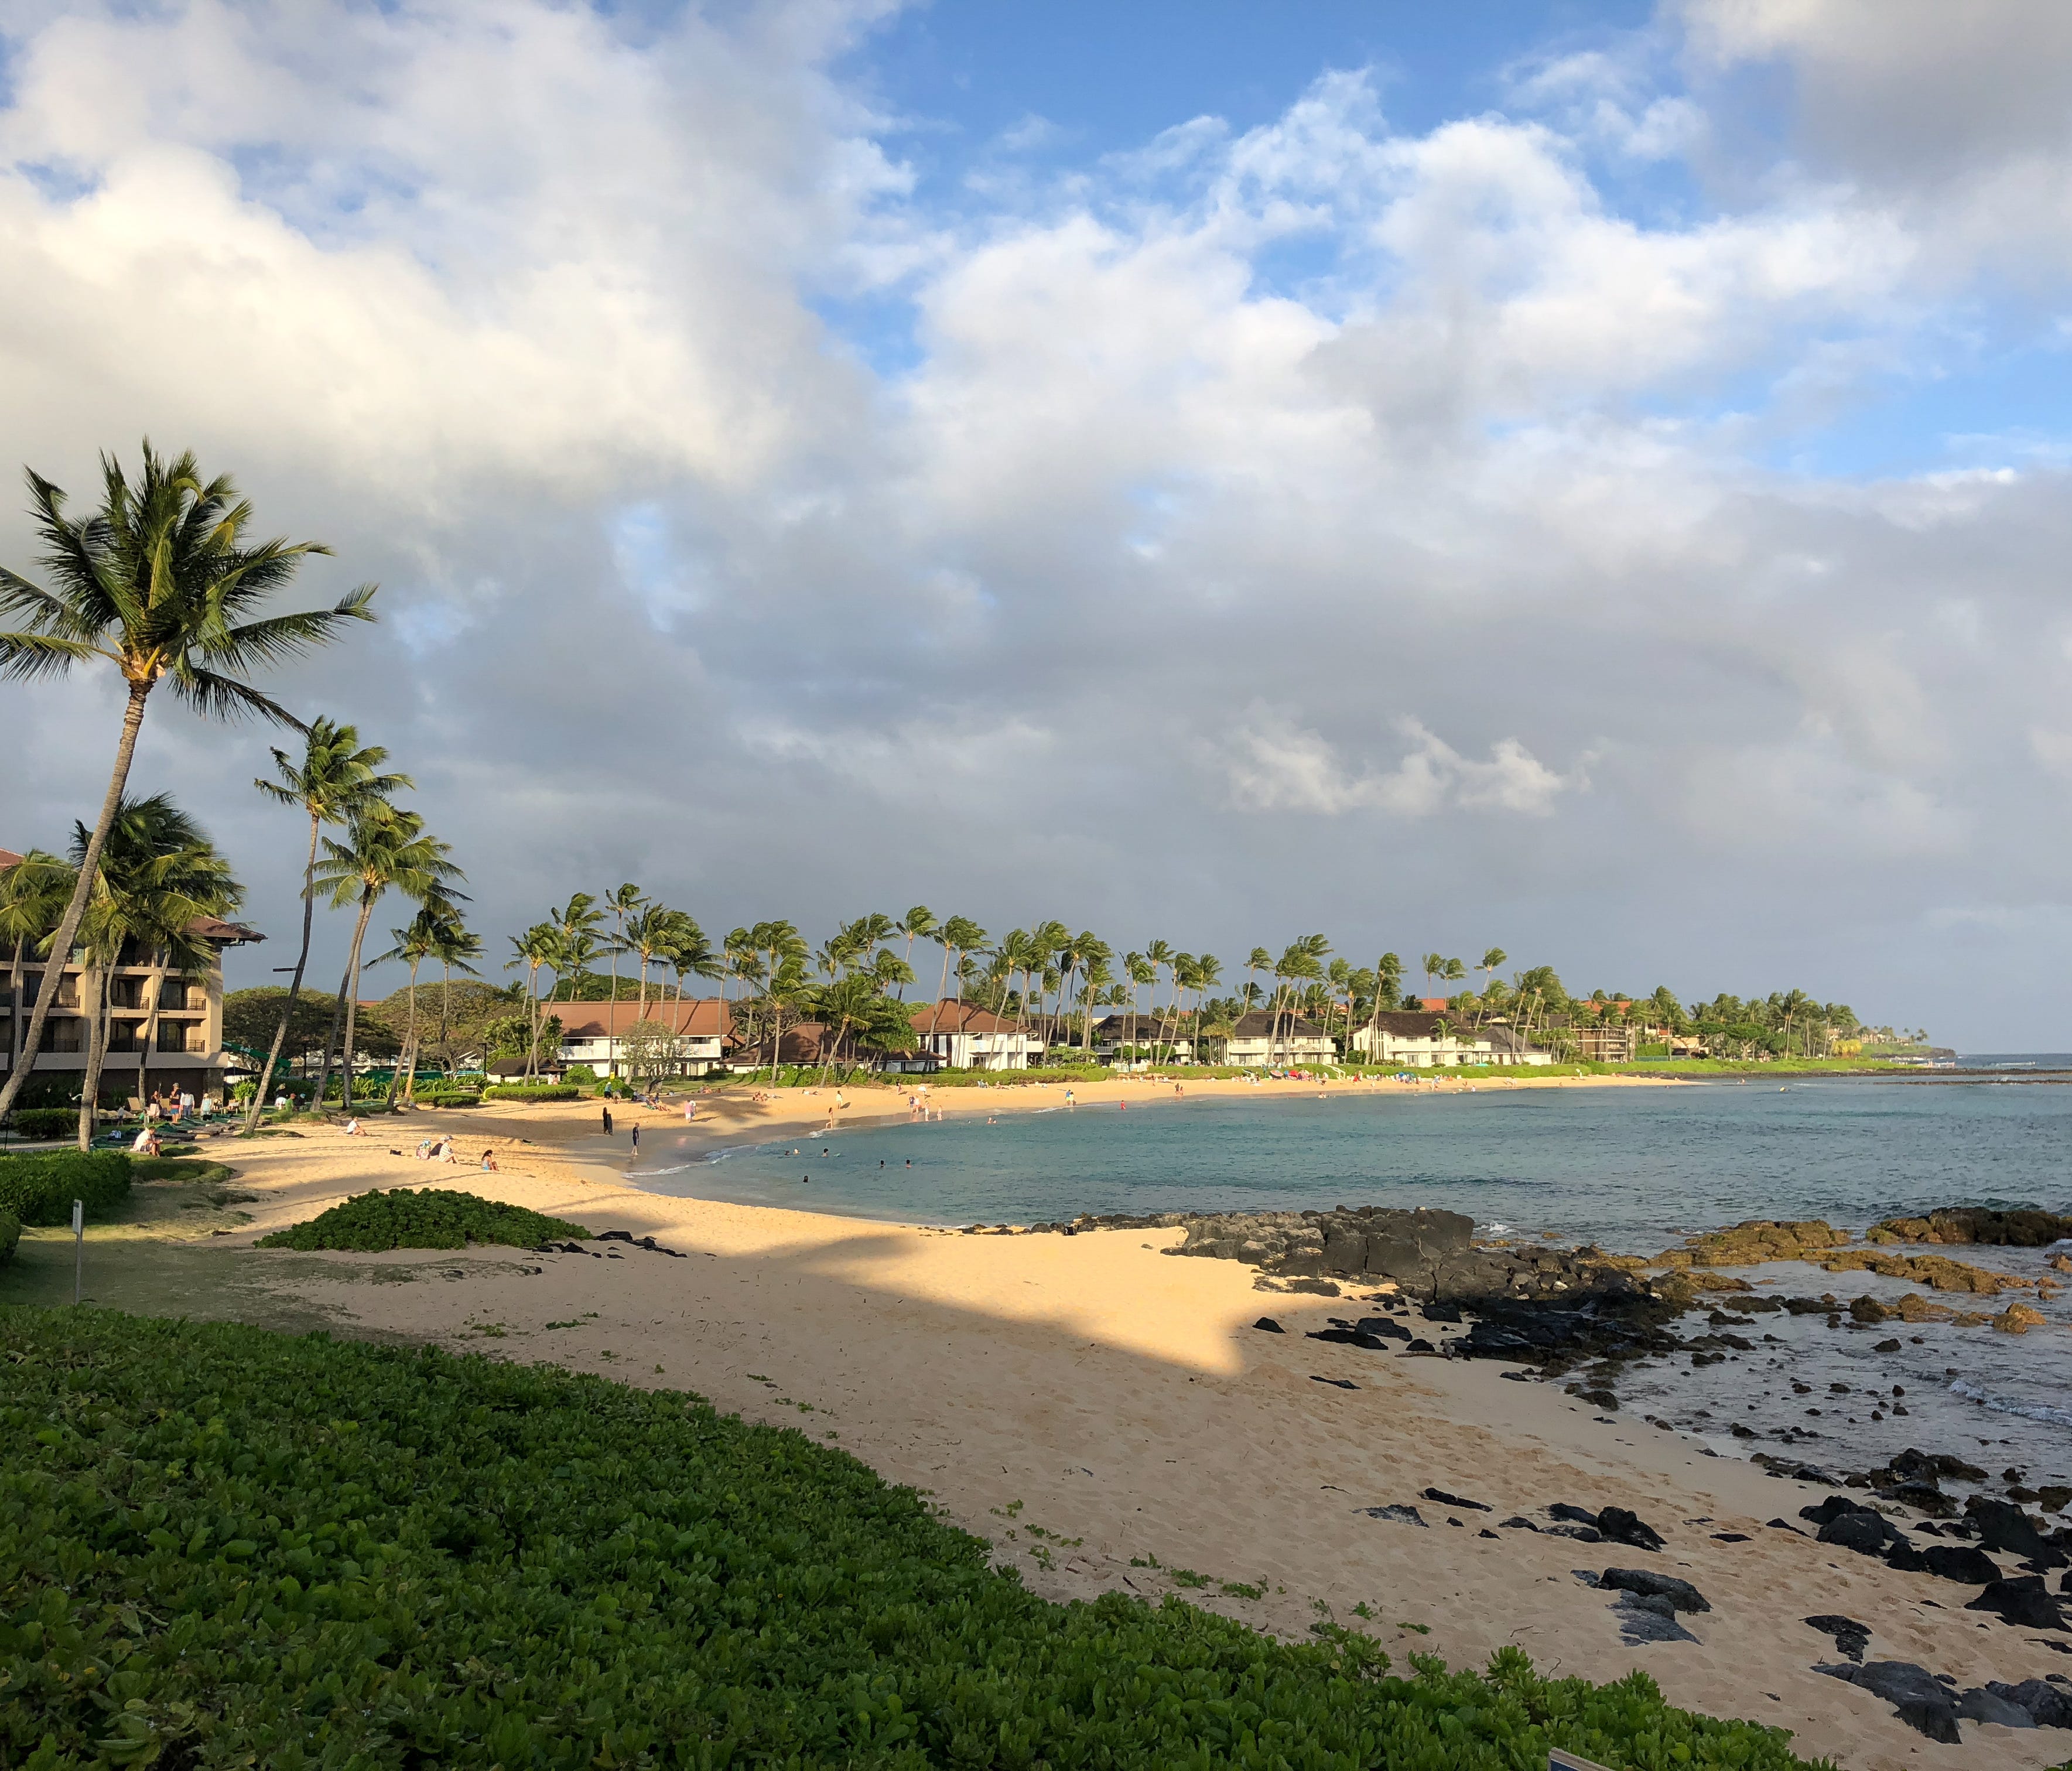 Early morning in Poipu Beach, just after sunrise